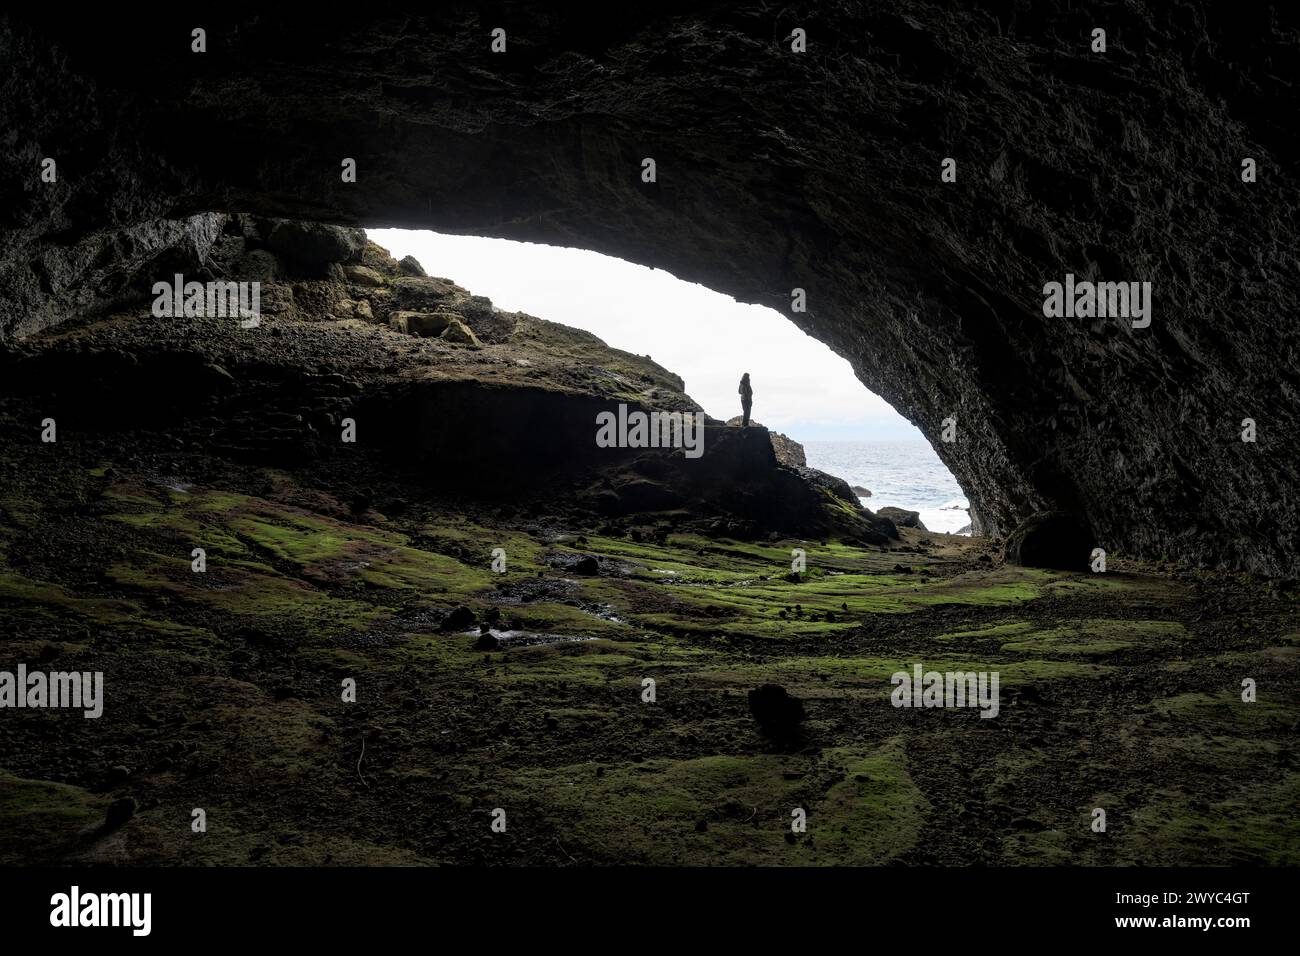 A person stands at the mouth of a large sea cave, silhouetted against the bright sky and rugged coastline Stock Photo